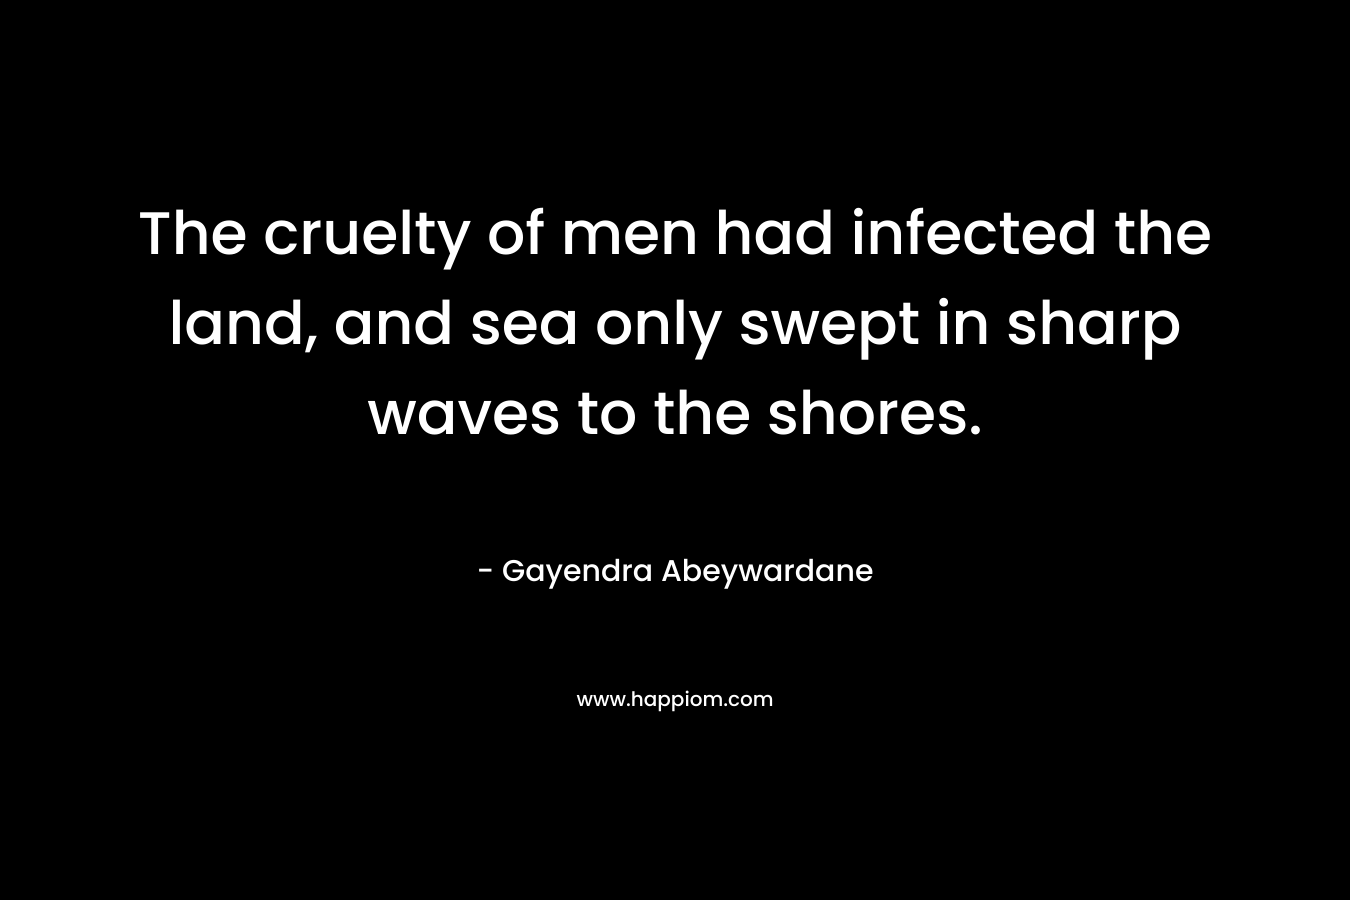 The cruelty of men had infected the land, and sea only swept in sharp waves to the shores. – Gayendra Abeywardane